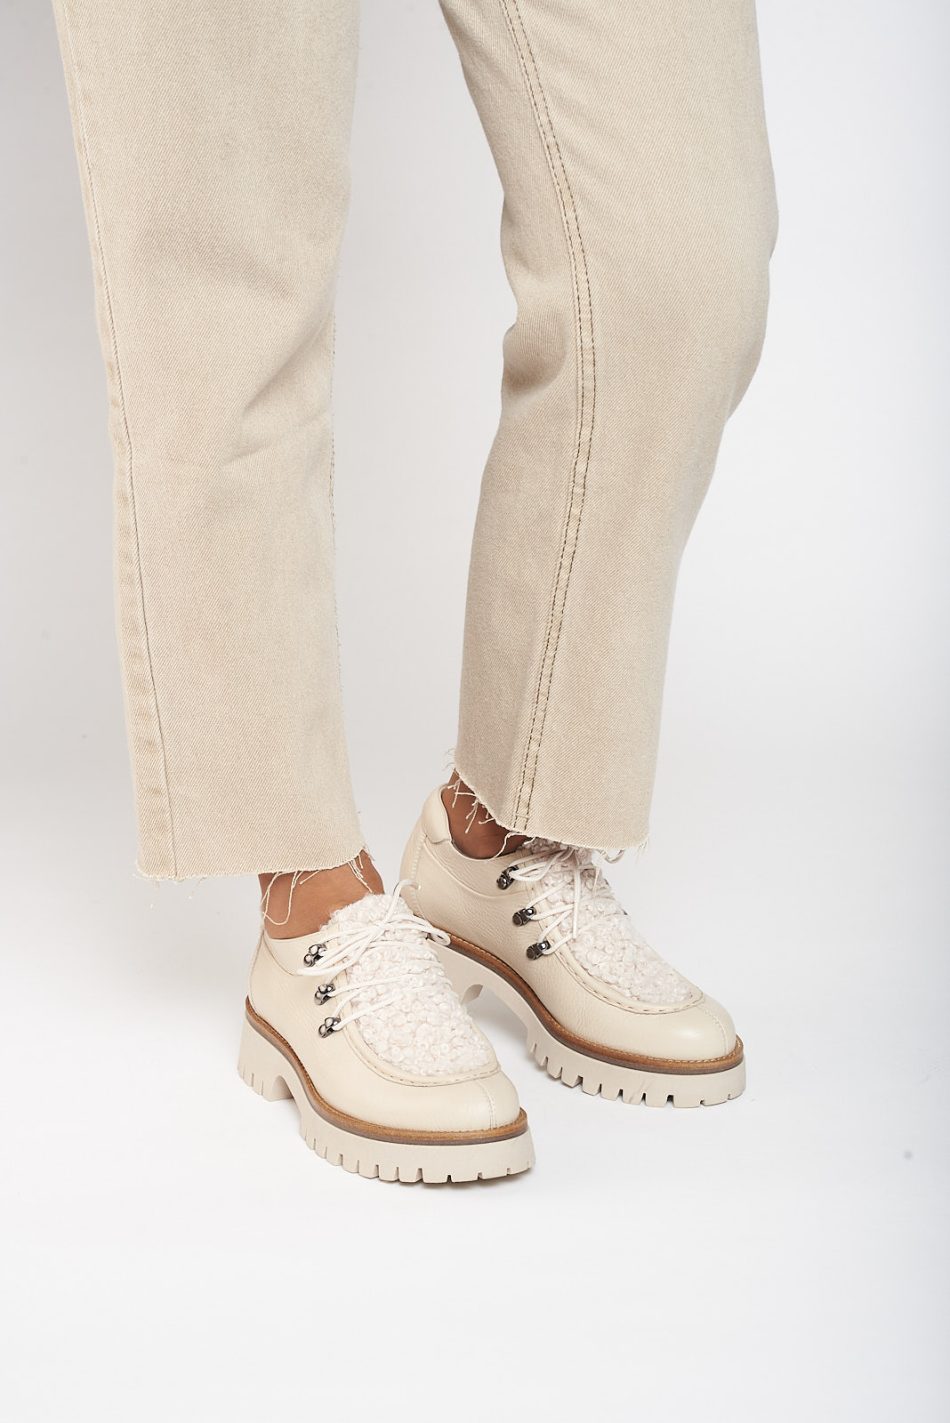 Shoe made entirely of leather and 4cm high sole. It is made from floty creme and its front is made from furry creme leather called mouton creme. It also has a small shoelace on the front and the eyelets are made of metal. The back is padded.